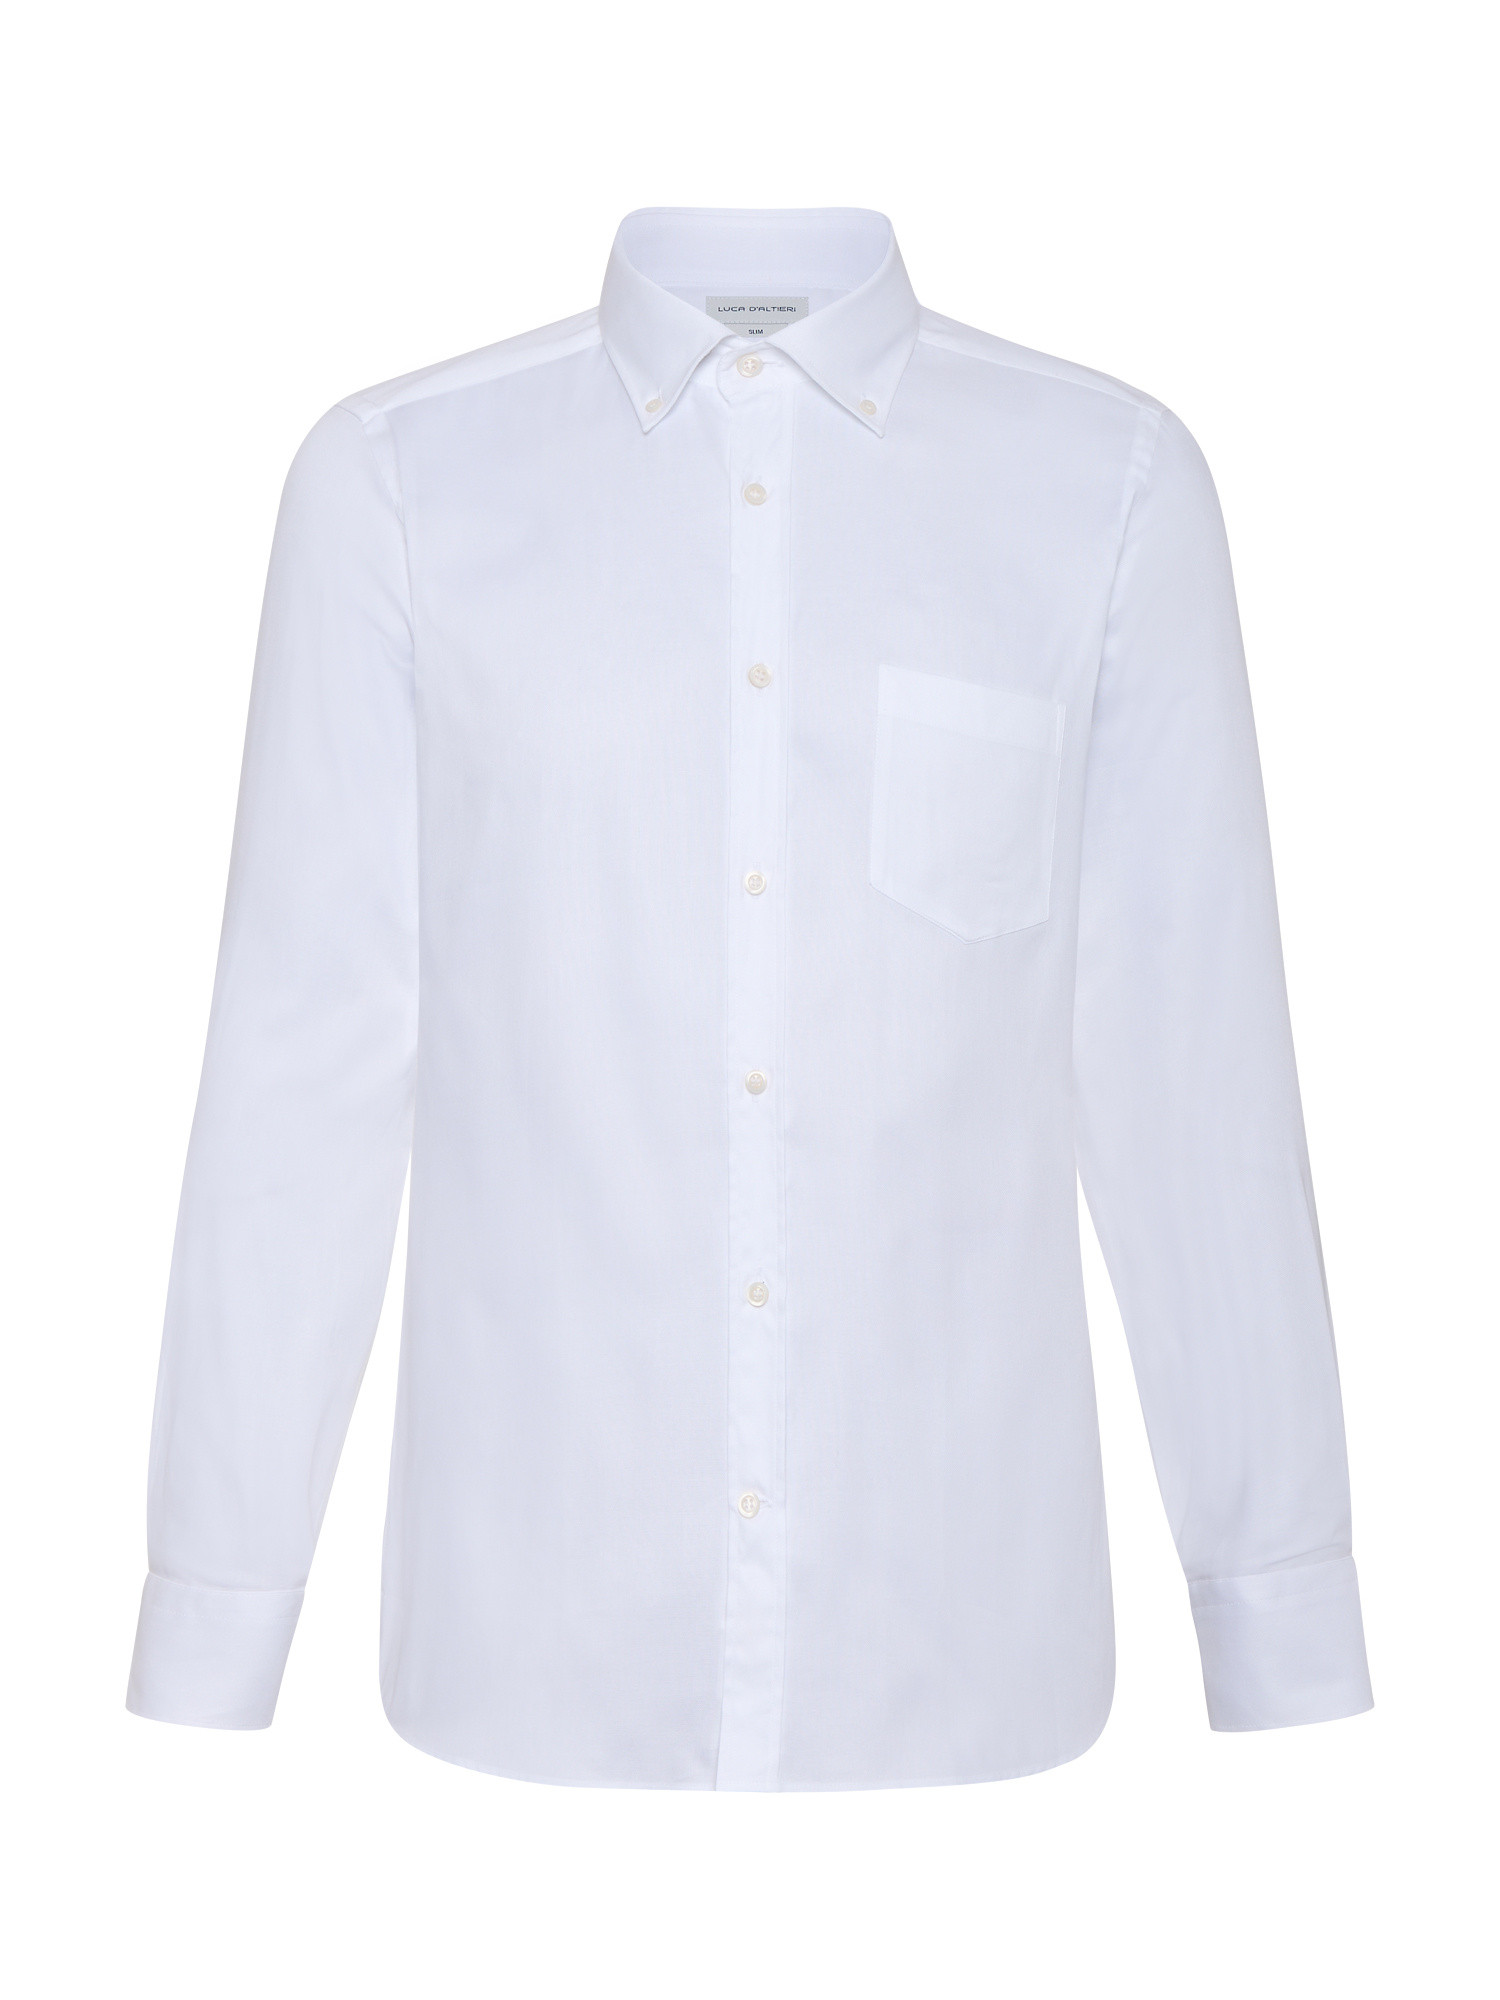 Luca D'Altieri - Casual slim fit shirt in pure cotton oxford, White, large image number 1